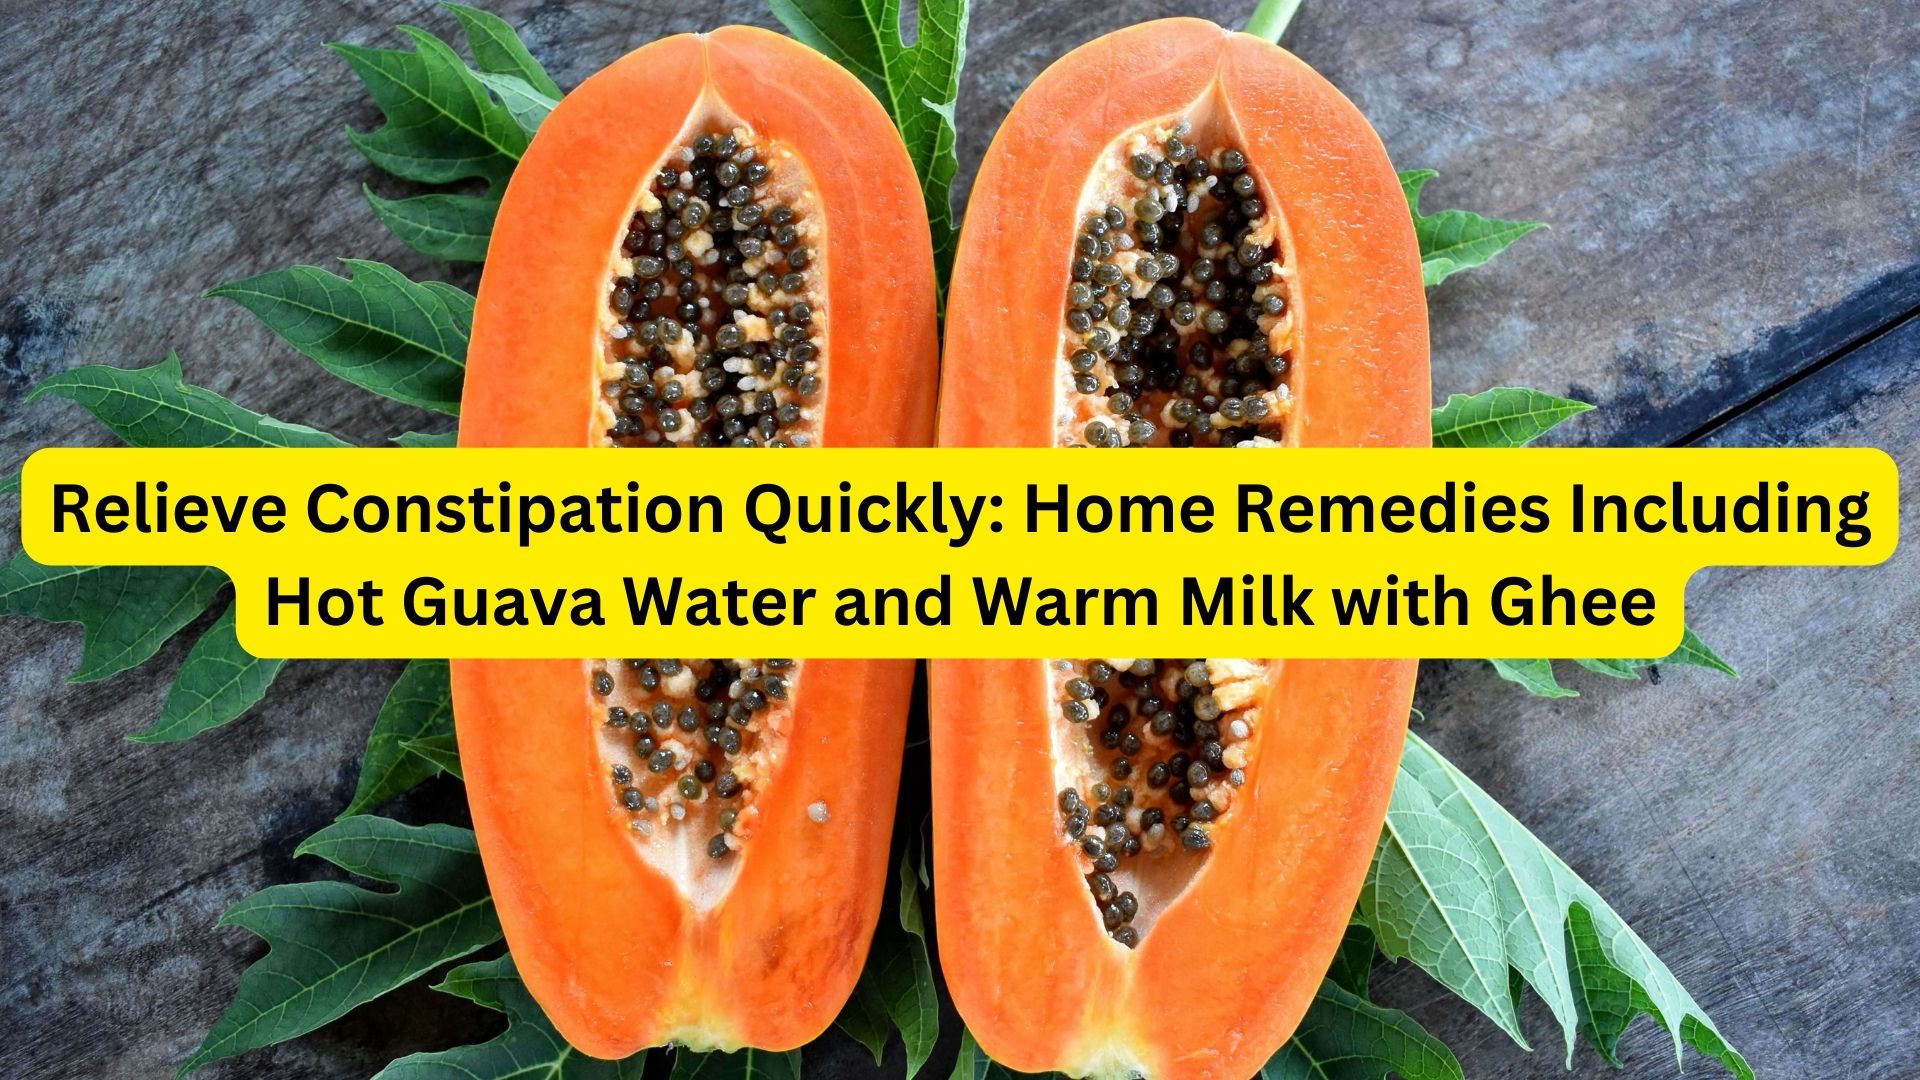 Relieve Constipation Quickly: Home Remedies Including Hot Guava Water and Warm Milk with Ghee